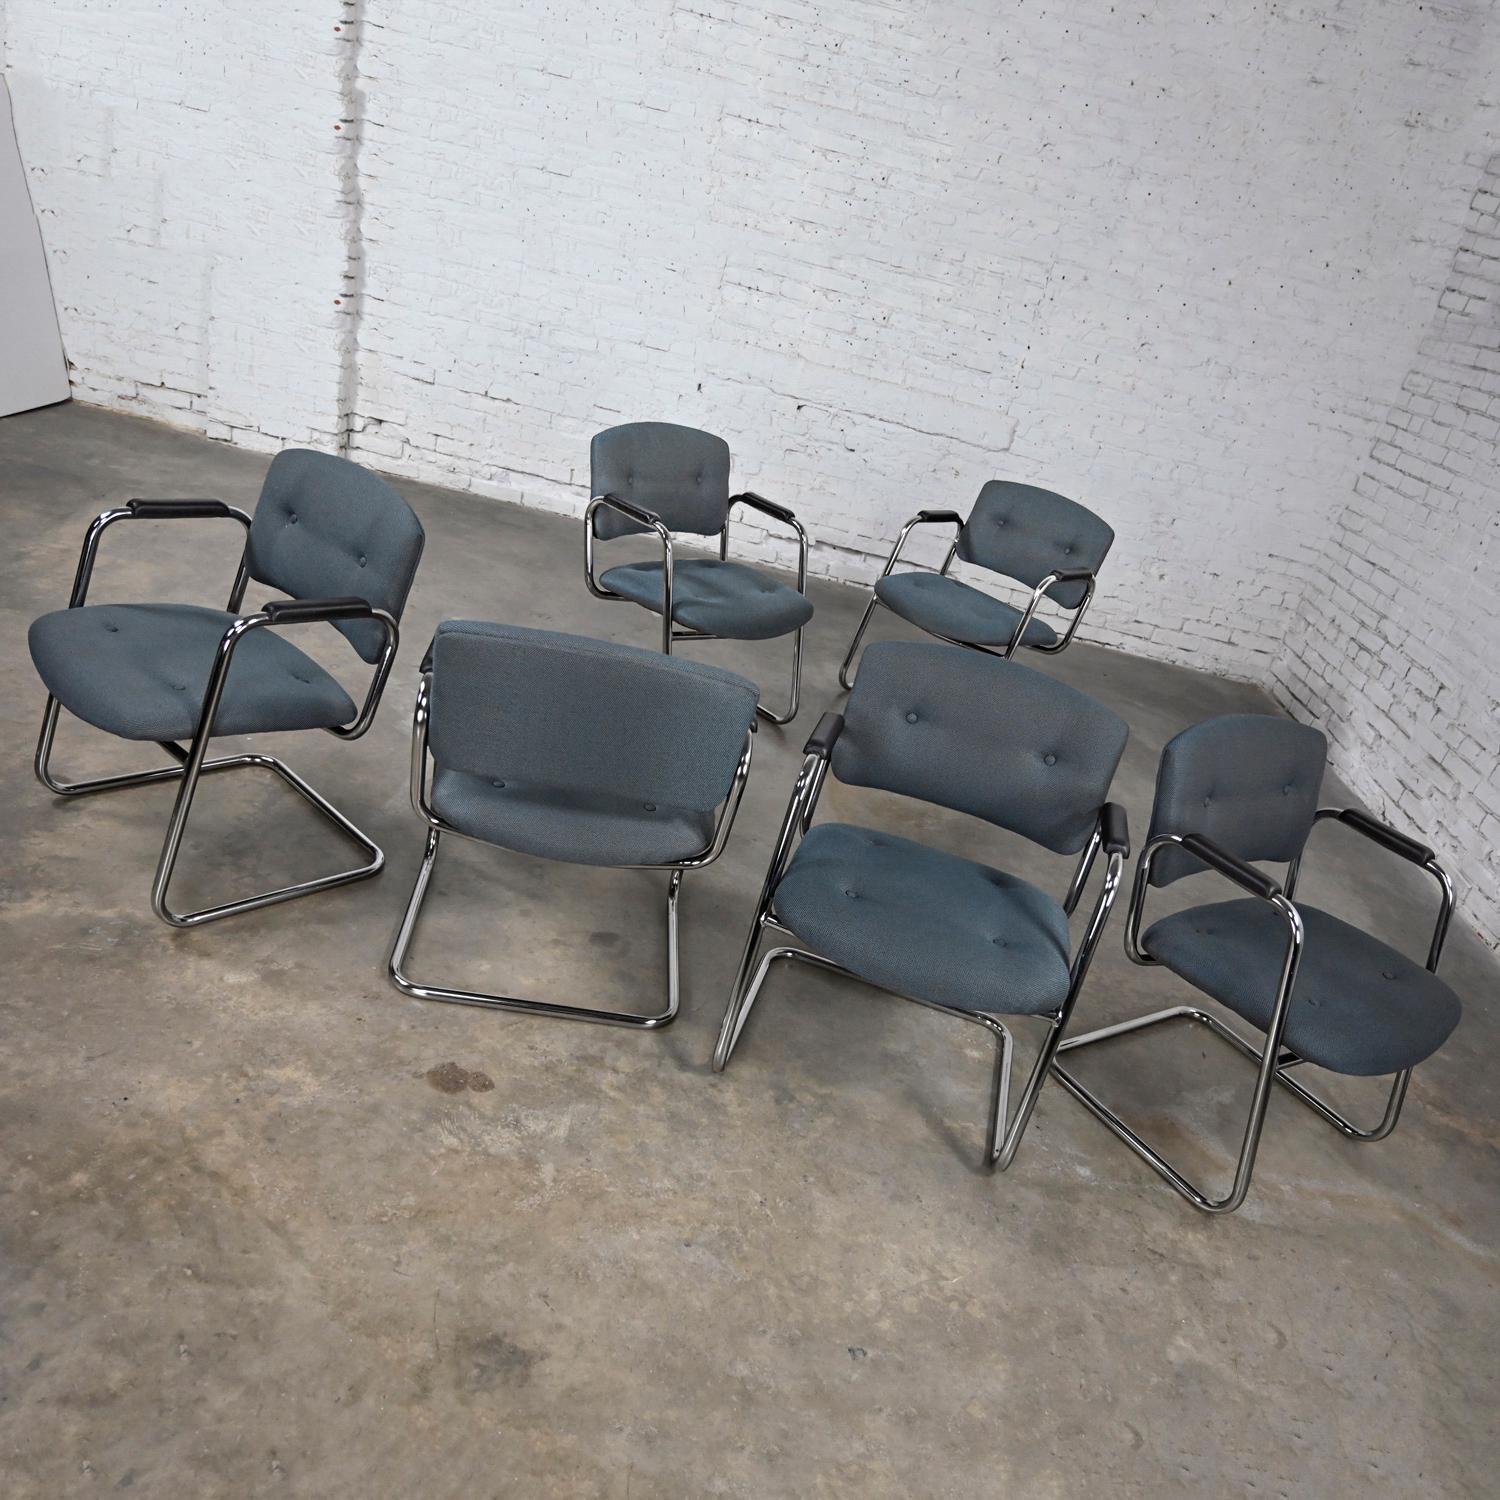 Late 20th Century Gray & Chrome Cantilever Chairs Style Steelcase Set of 6 For Sale 6